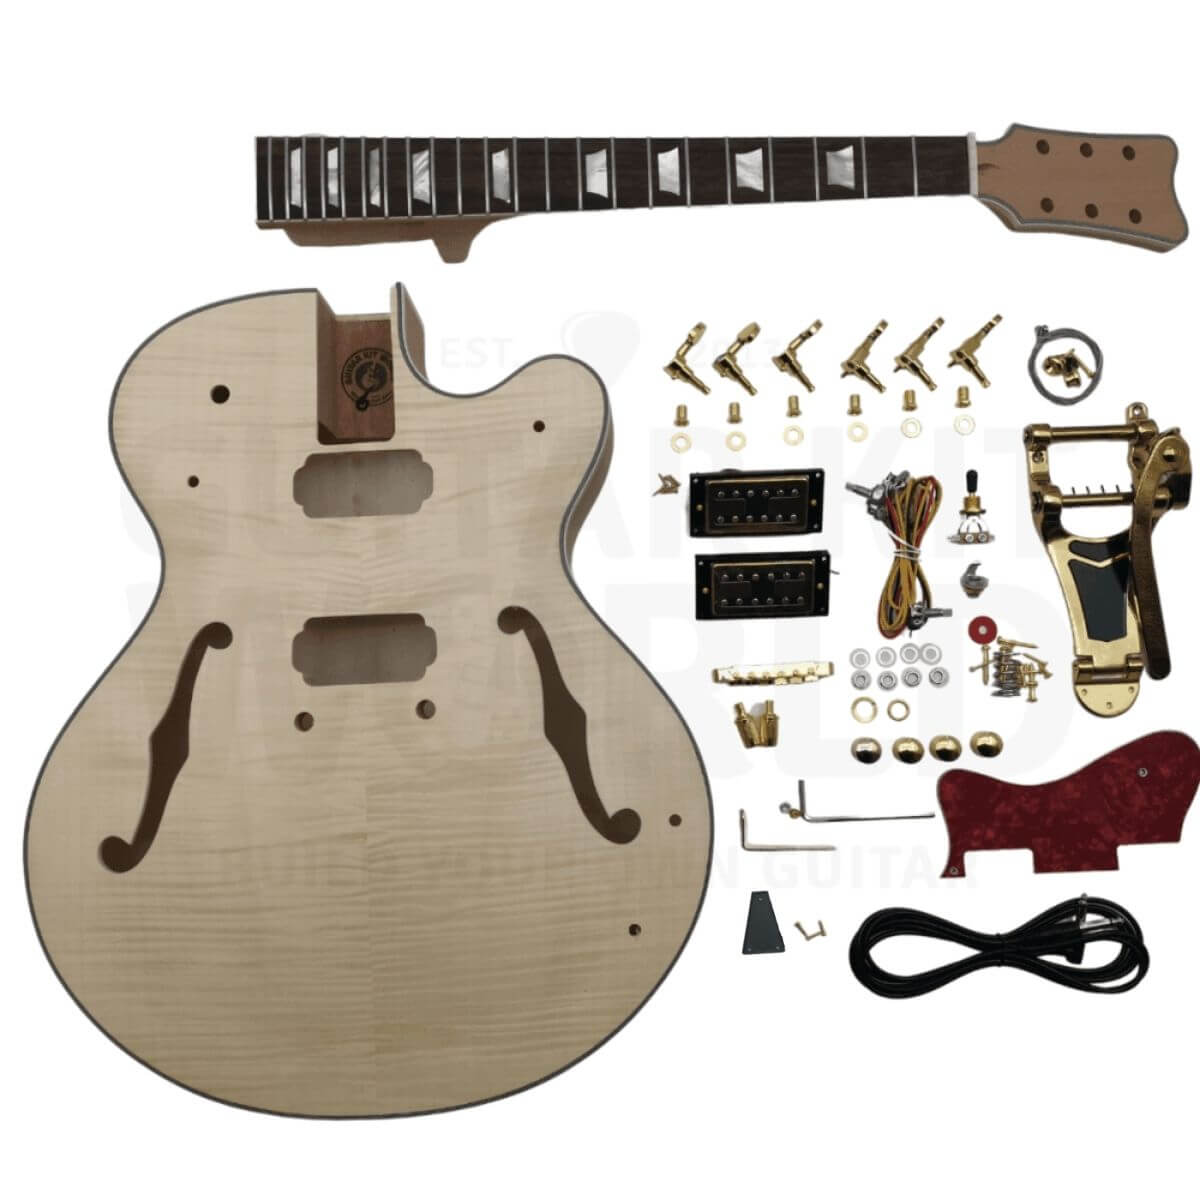 Hollow Body Guitar Kit with Flamed Maple Body Veneer, Rosewood Fretboard